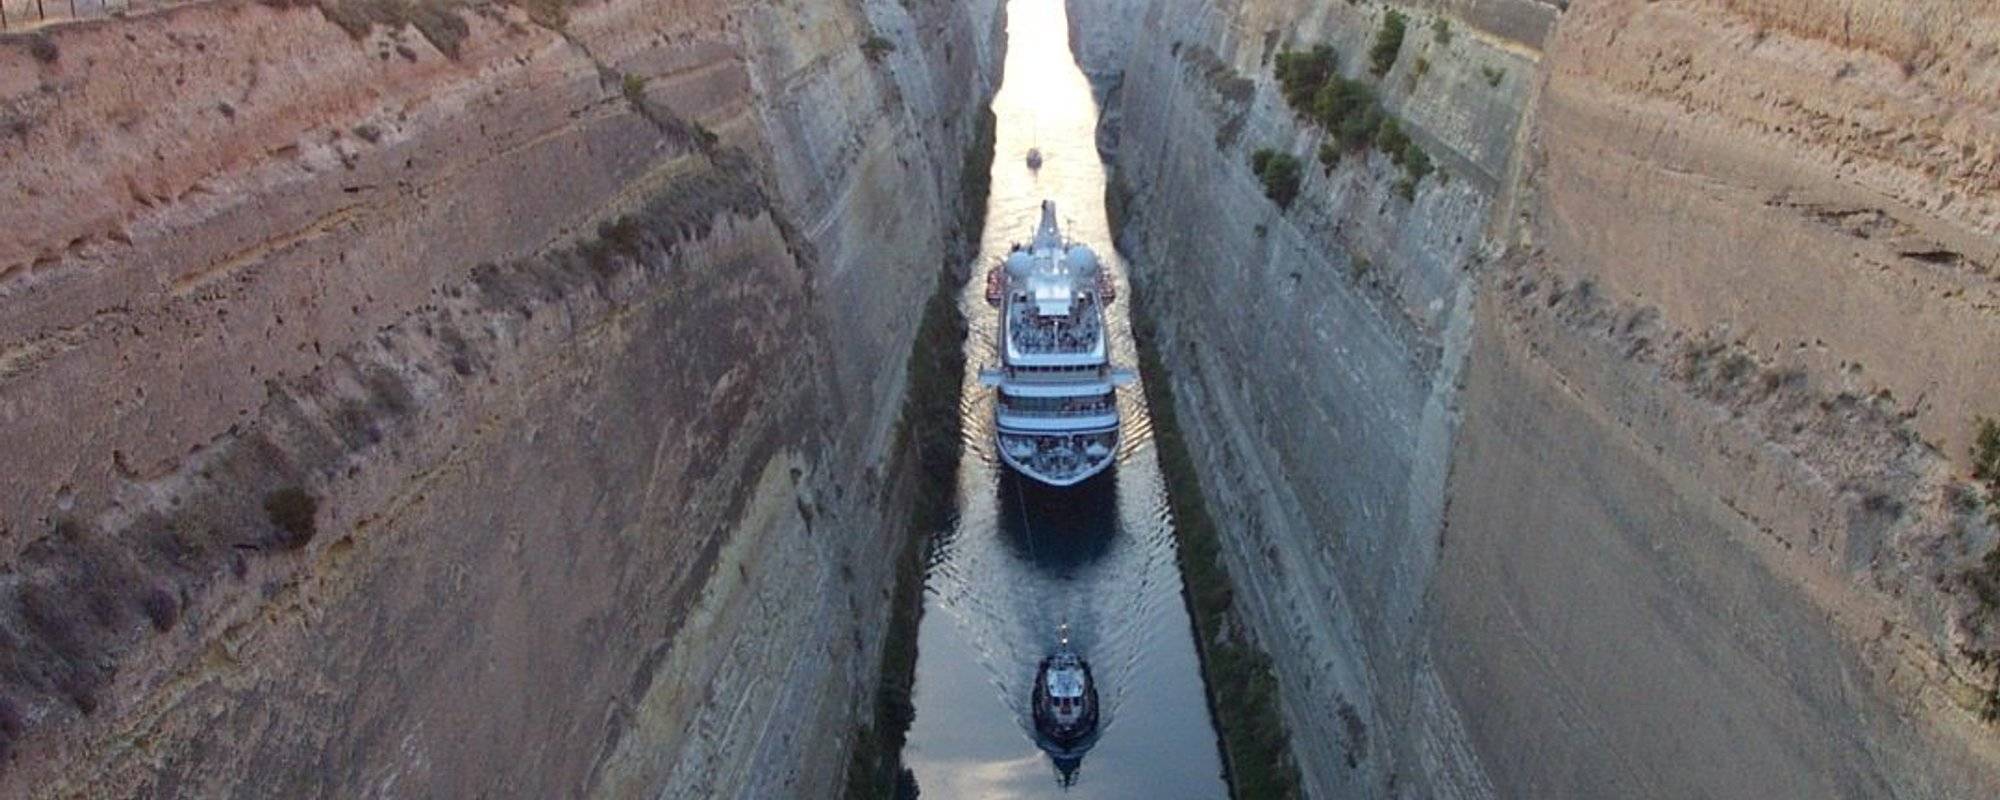 The Canal of Corinth, tip for a trip - Greece 